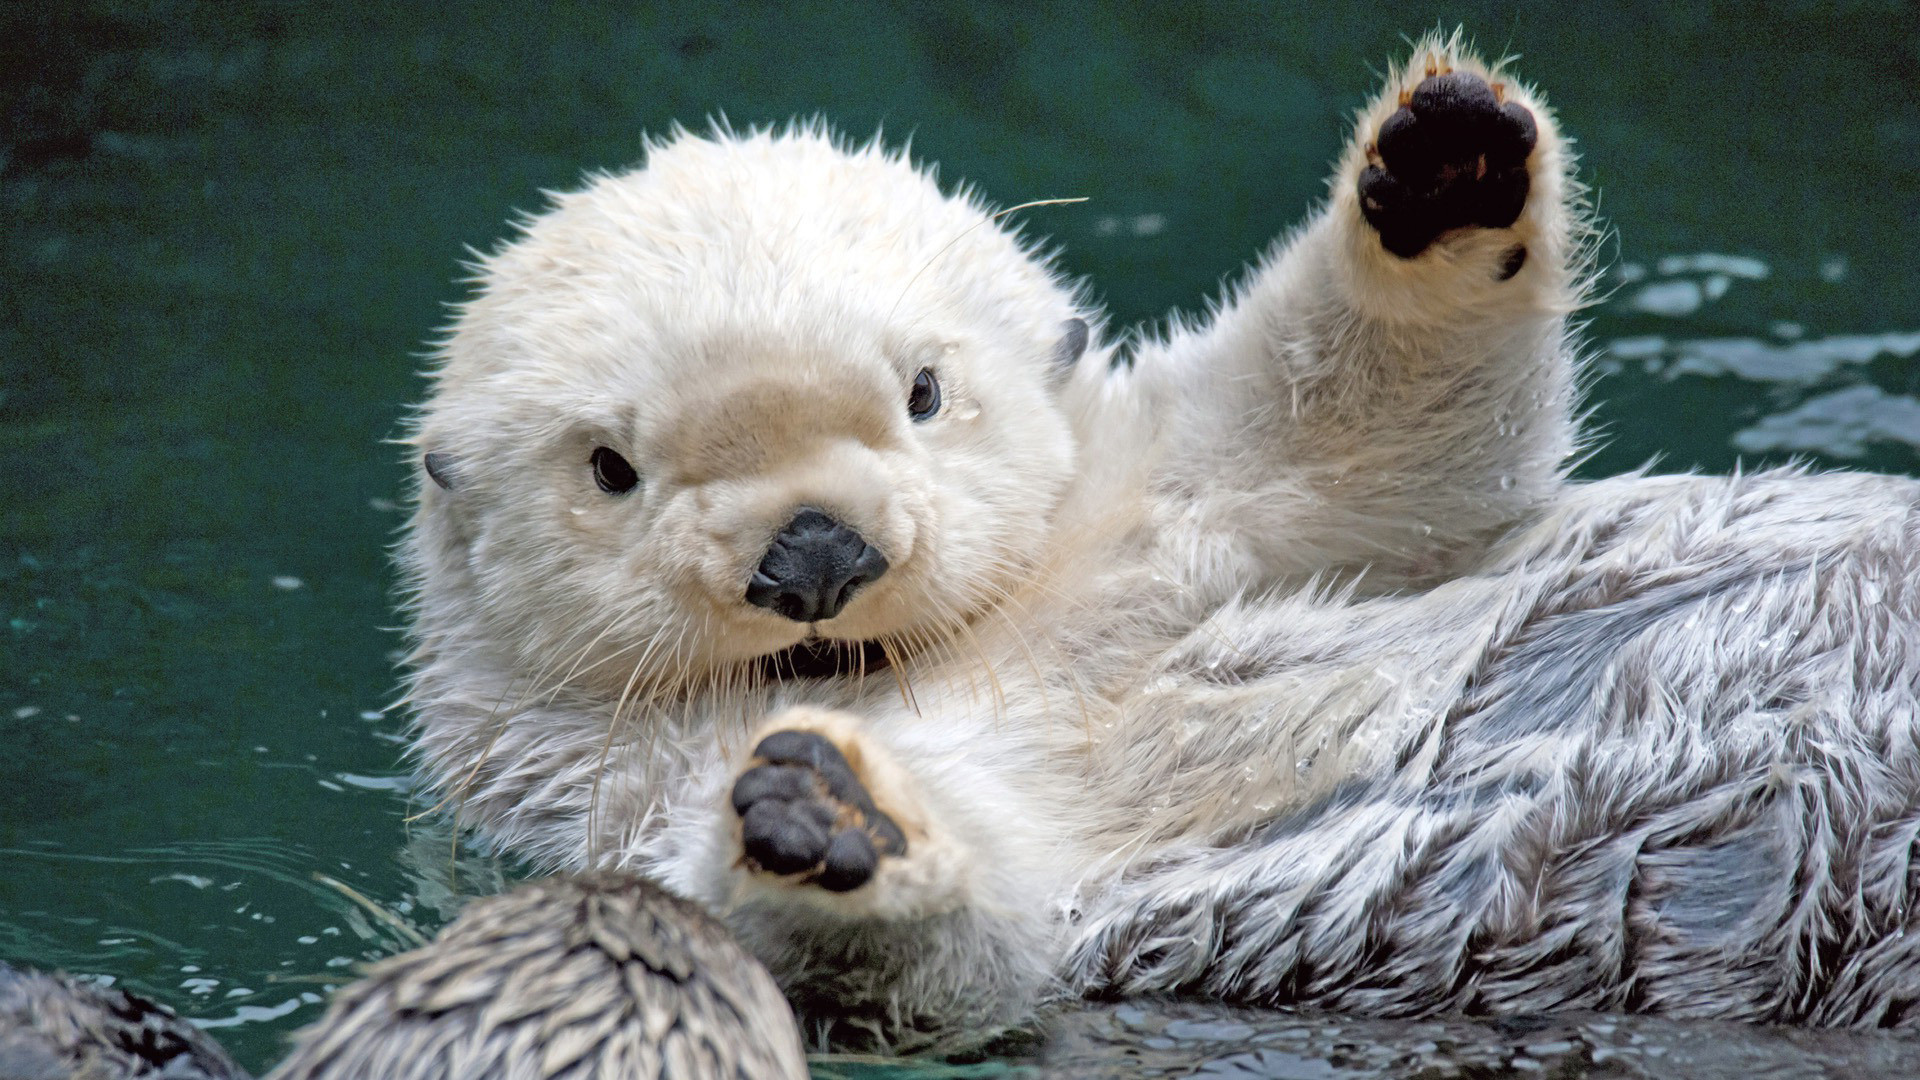 1920x1080 Sea Otter HD Wallpaper | Sea Otter Pictures | Cool Wallpapers